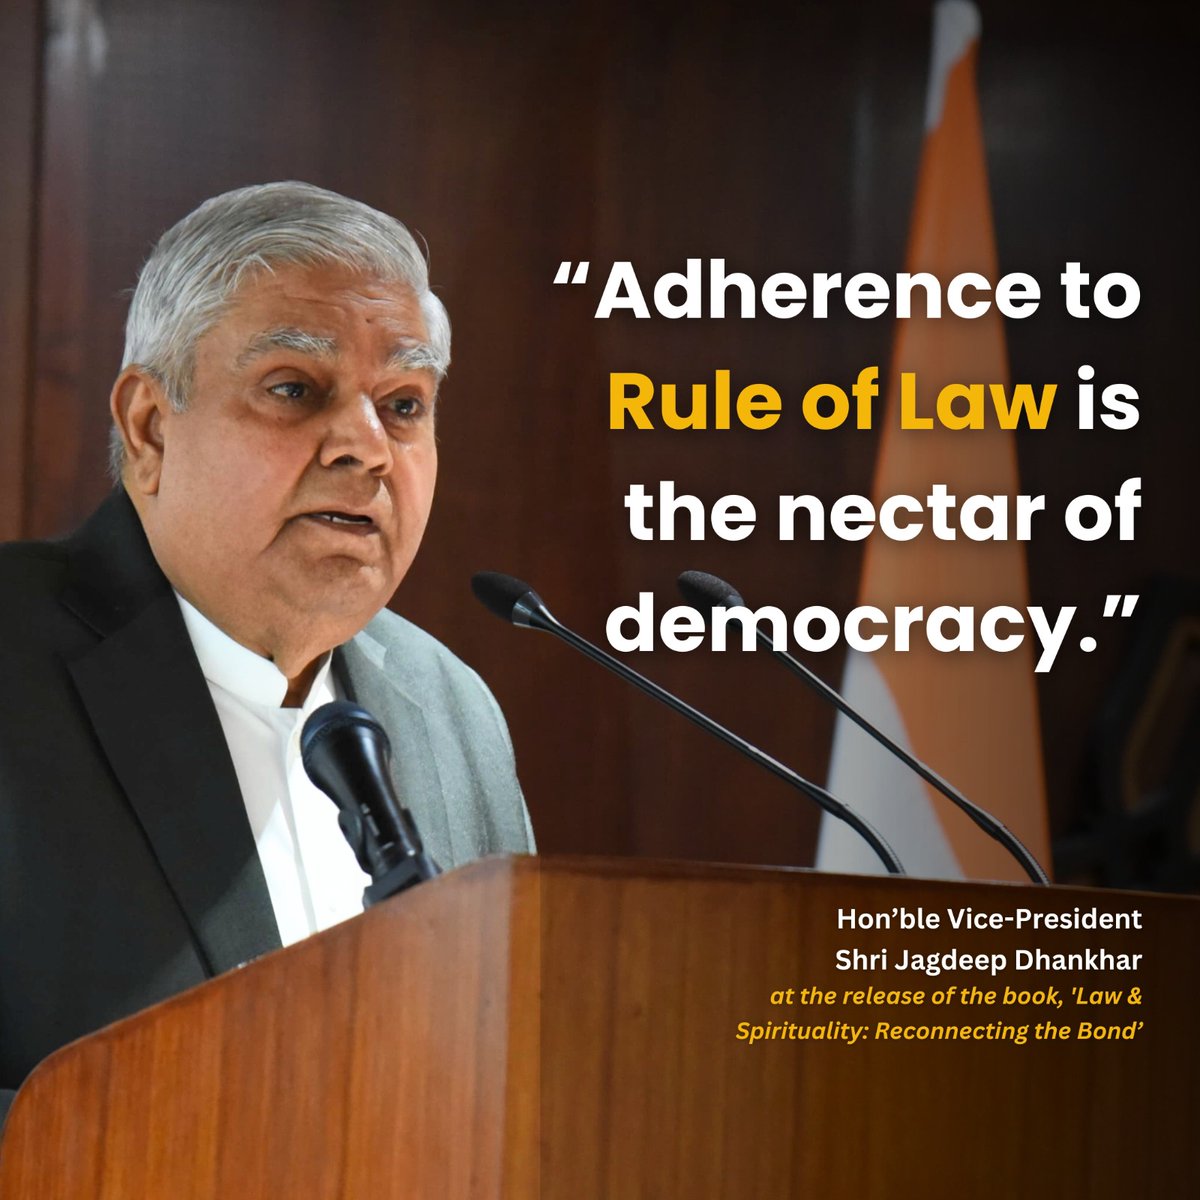 Adherence to Rule of Law is the nectar of democracy. #LawAndSpirituality